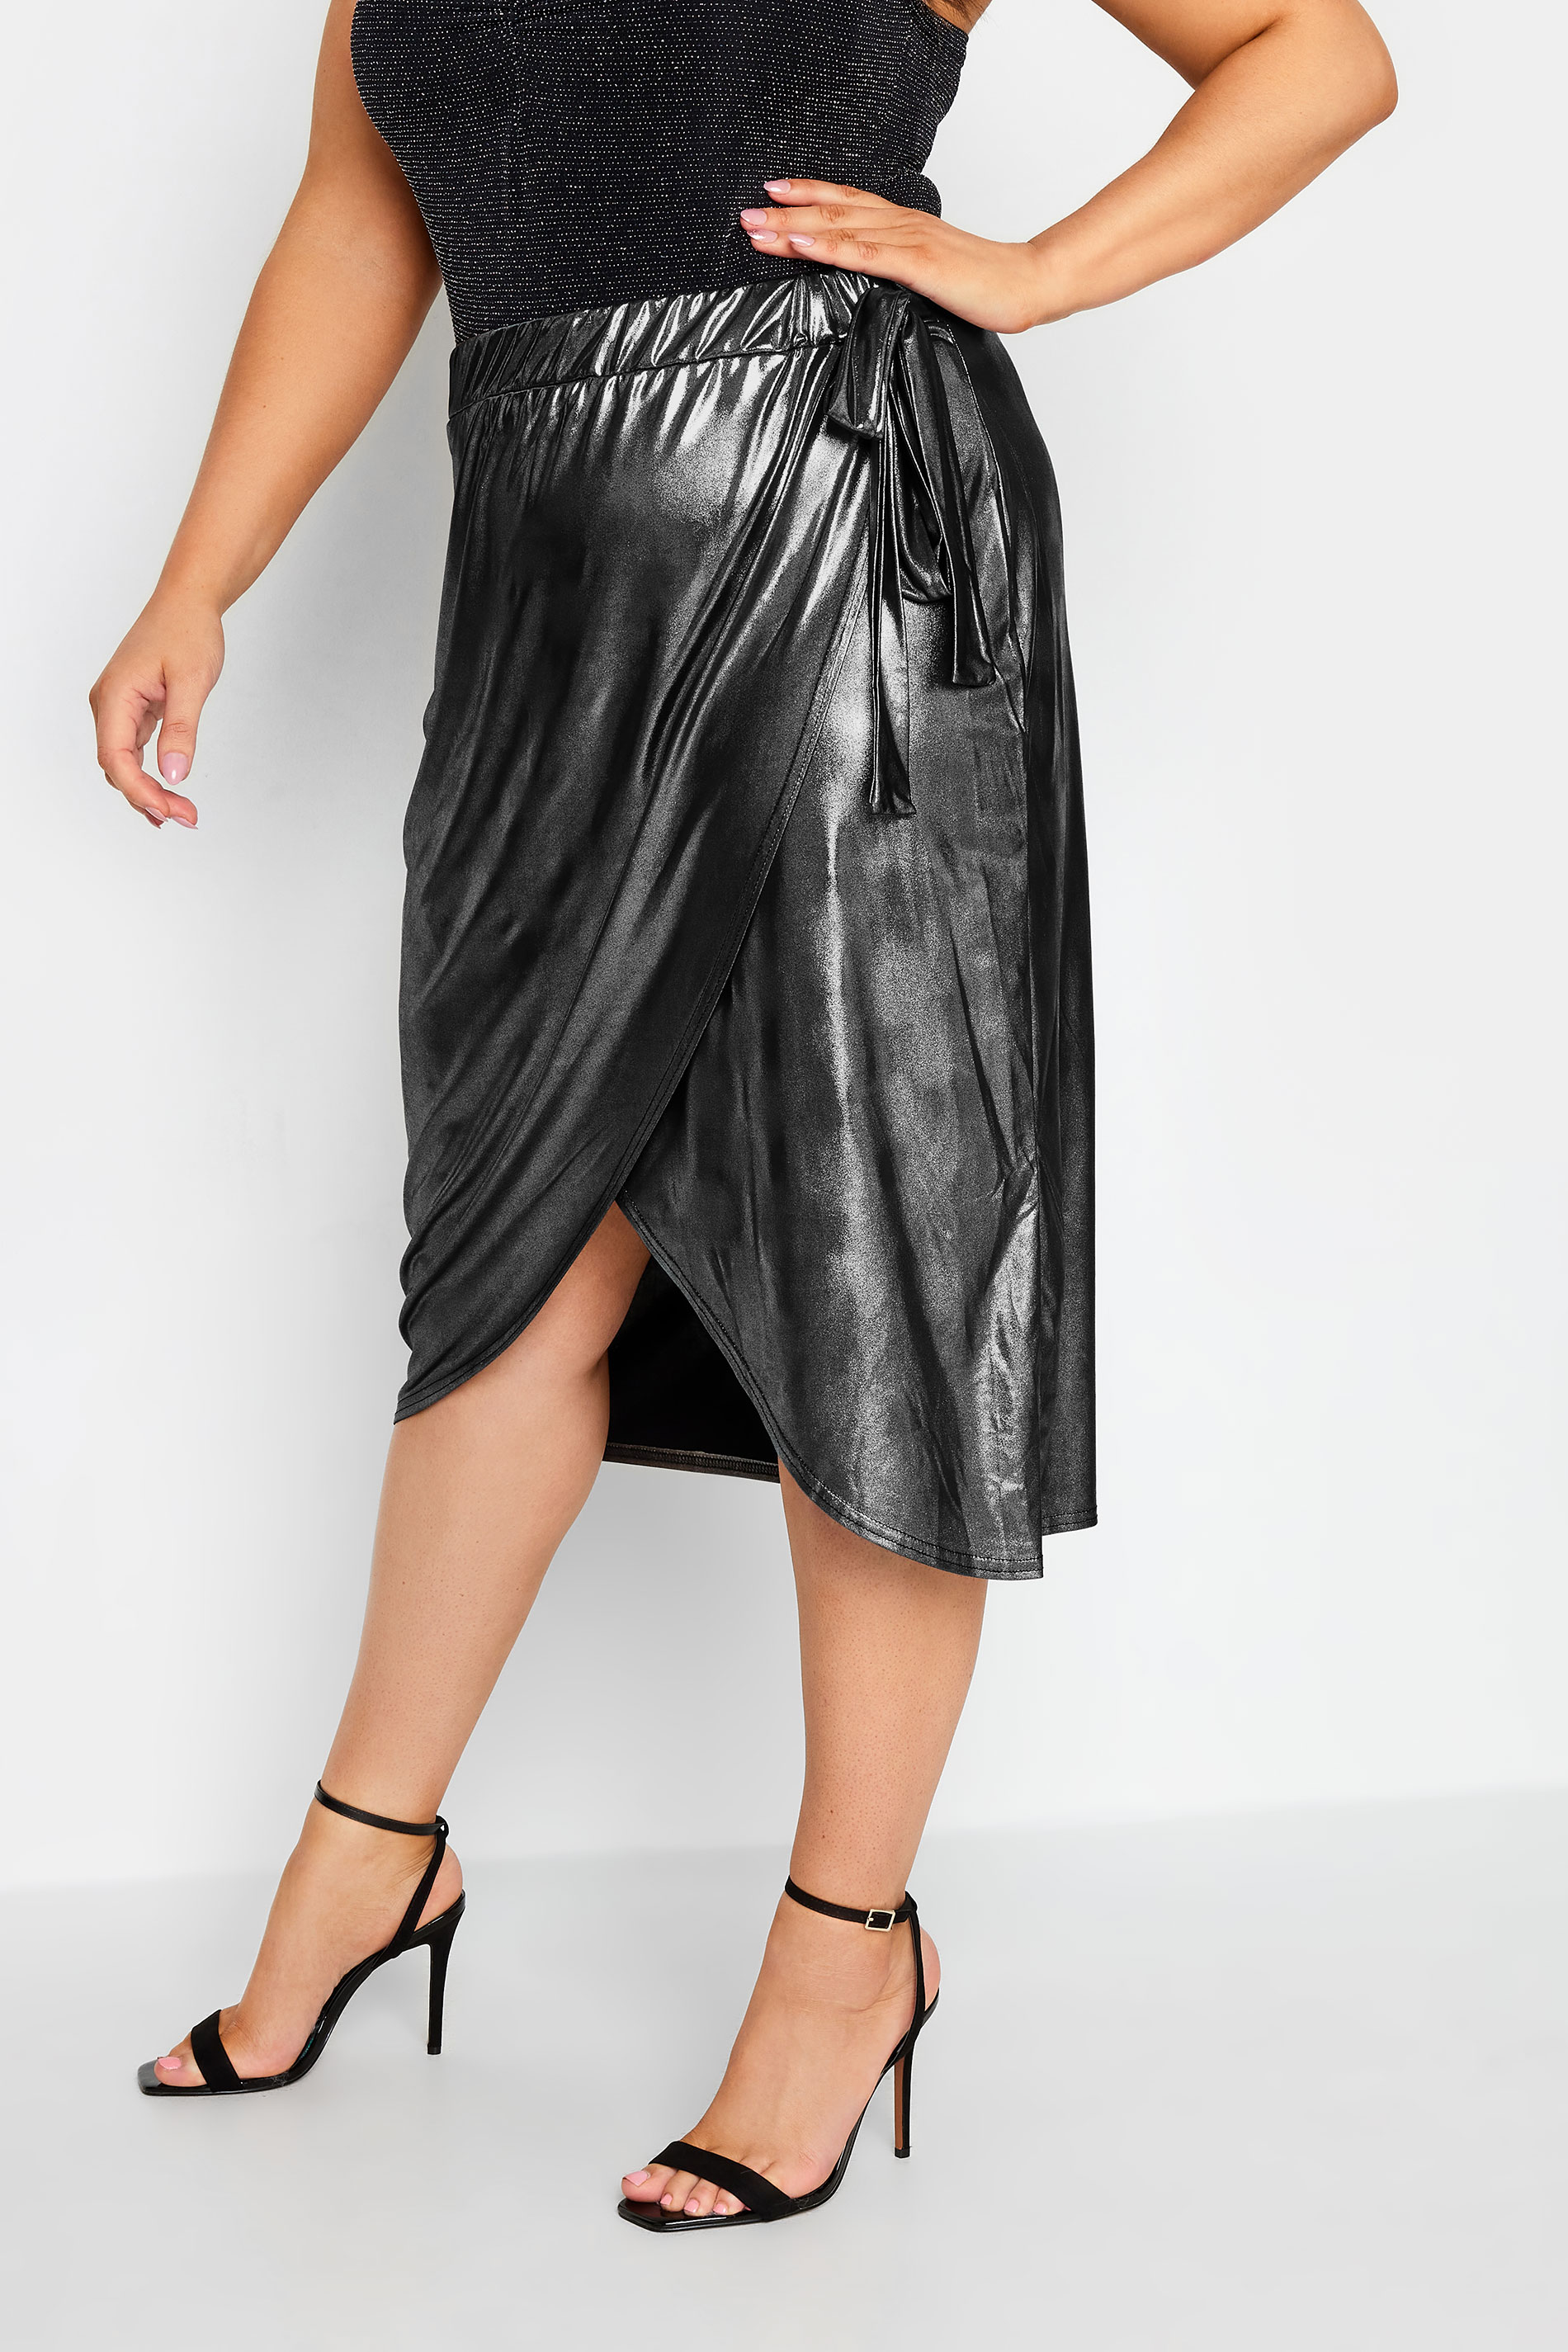 LIMITED COLLECTION Plus Size Silver Foil Wrap Skirt | Yours Clothing 1